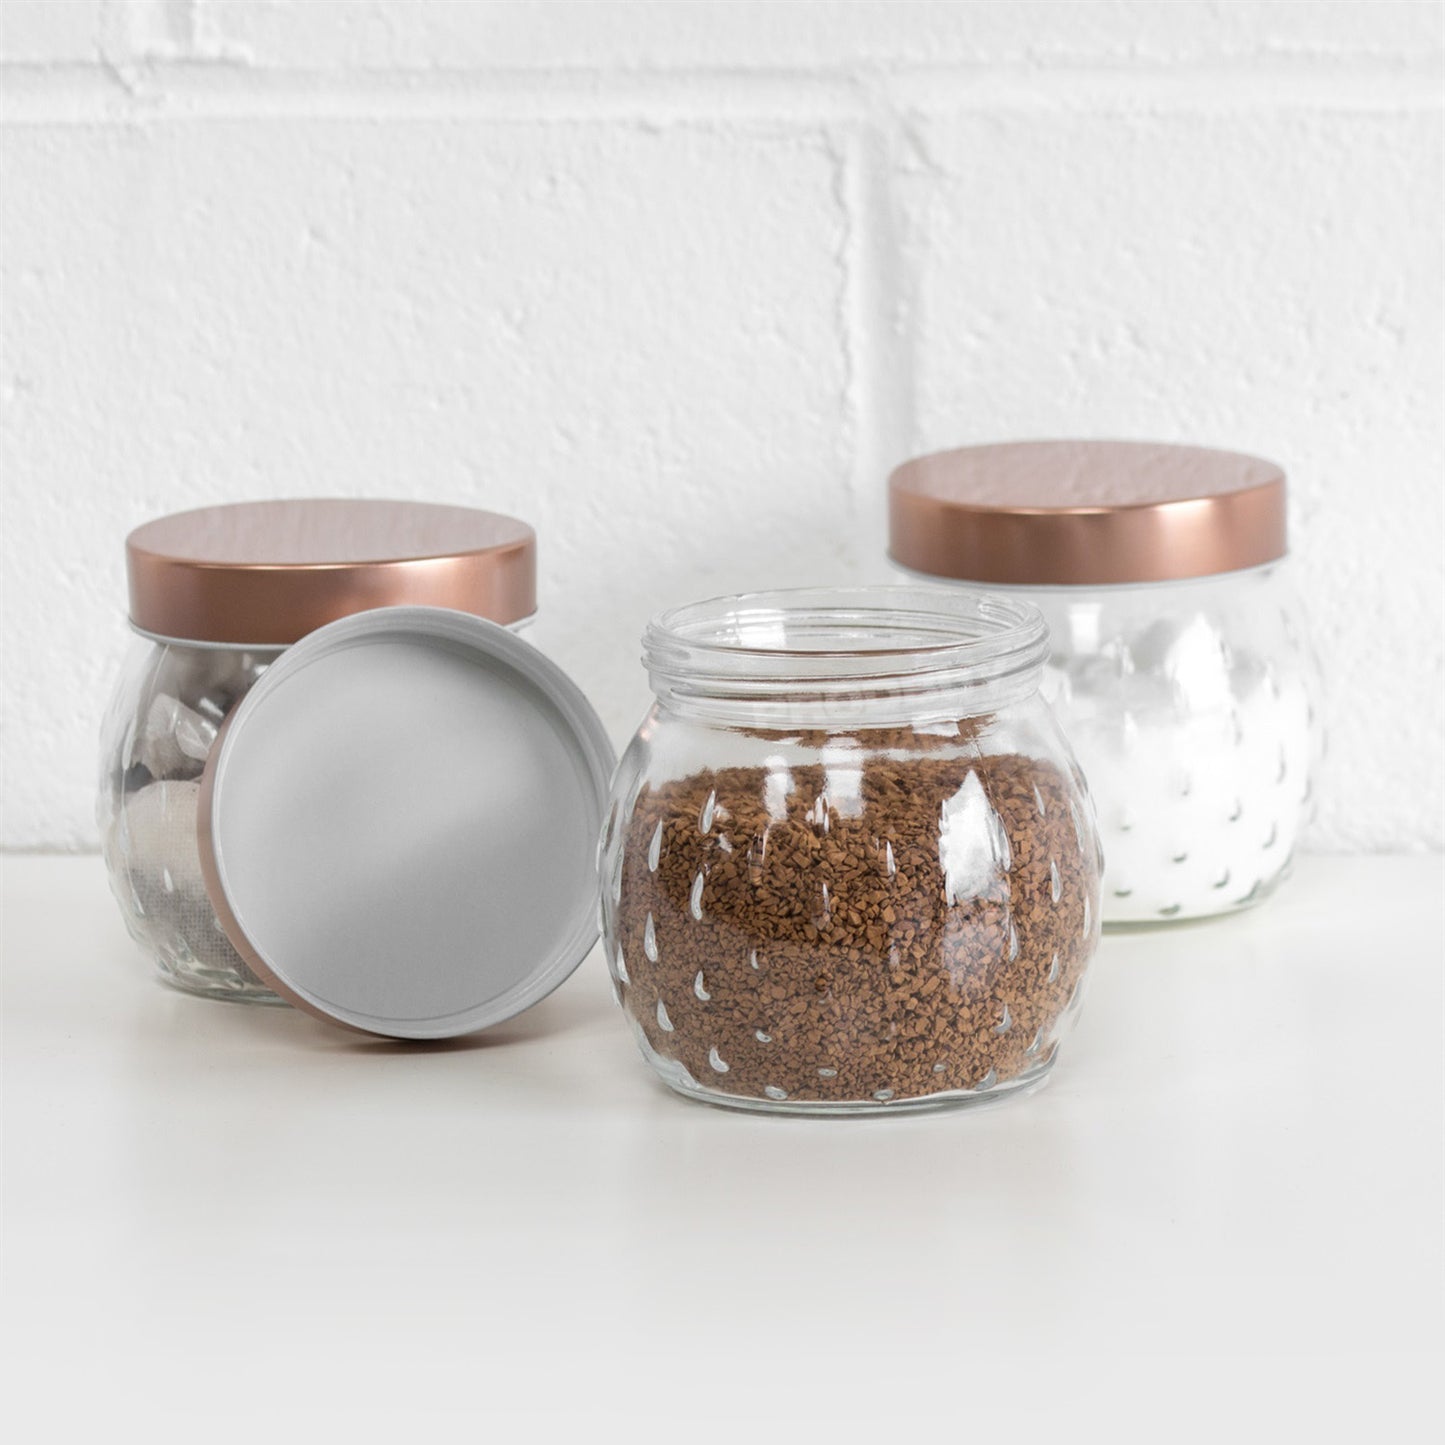 Set of 3 Embossed Glass Storage Jars with Copper Lids